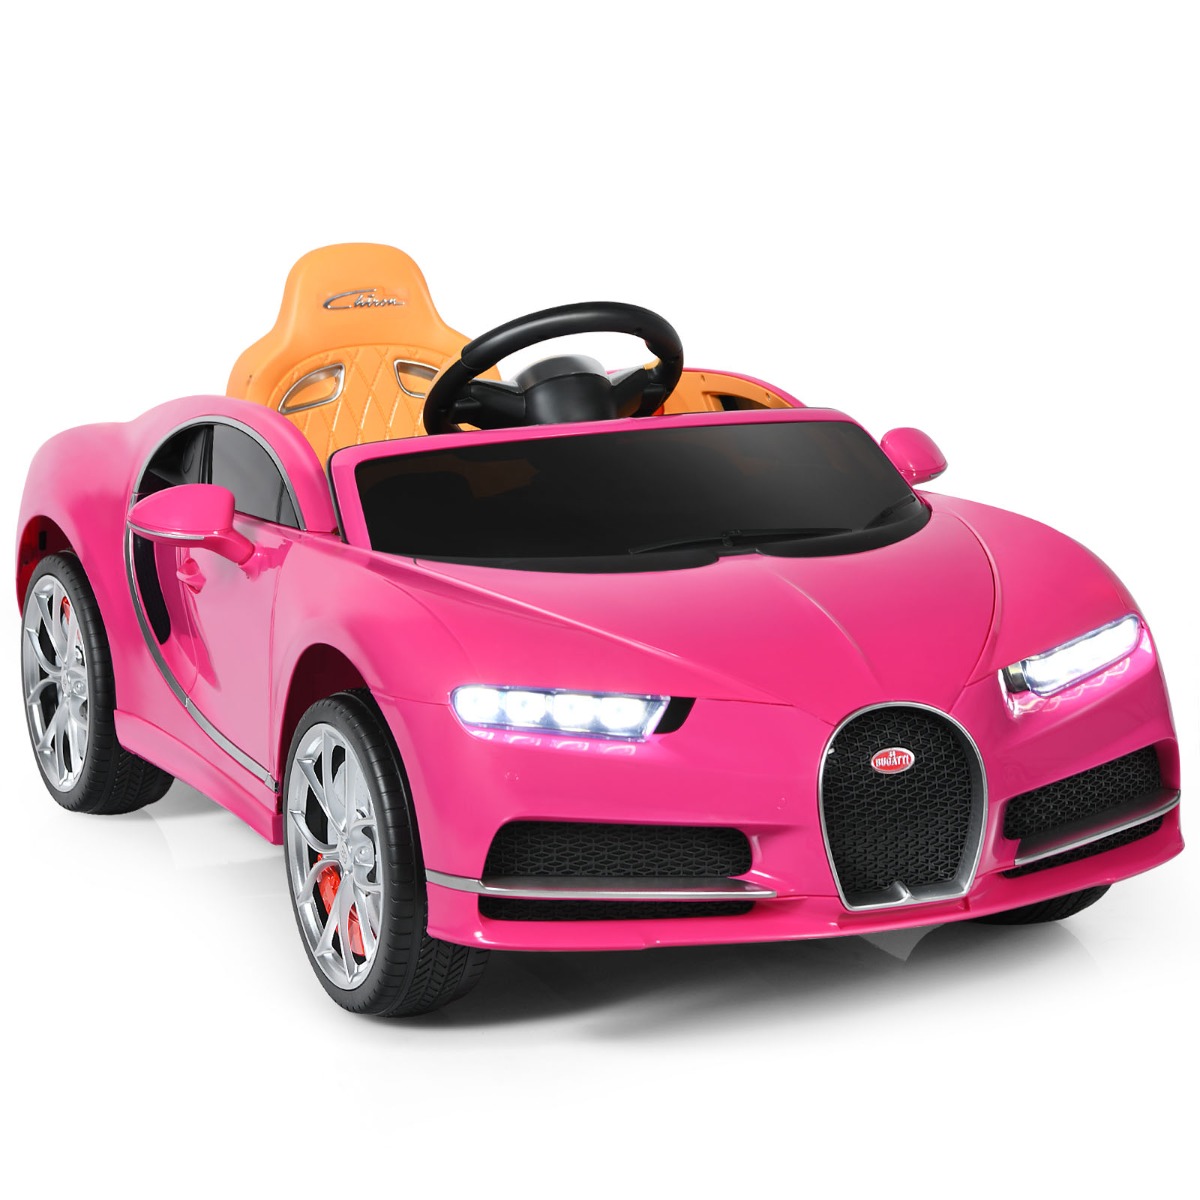 12V Kids Licensed Battery Powered Vehicle with Remote Control-Pink